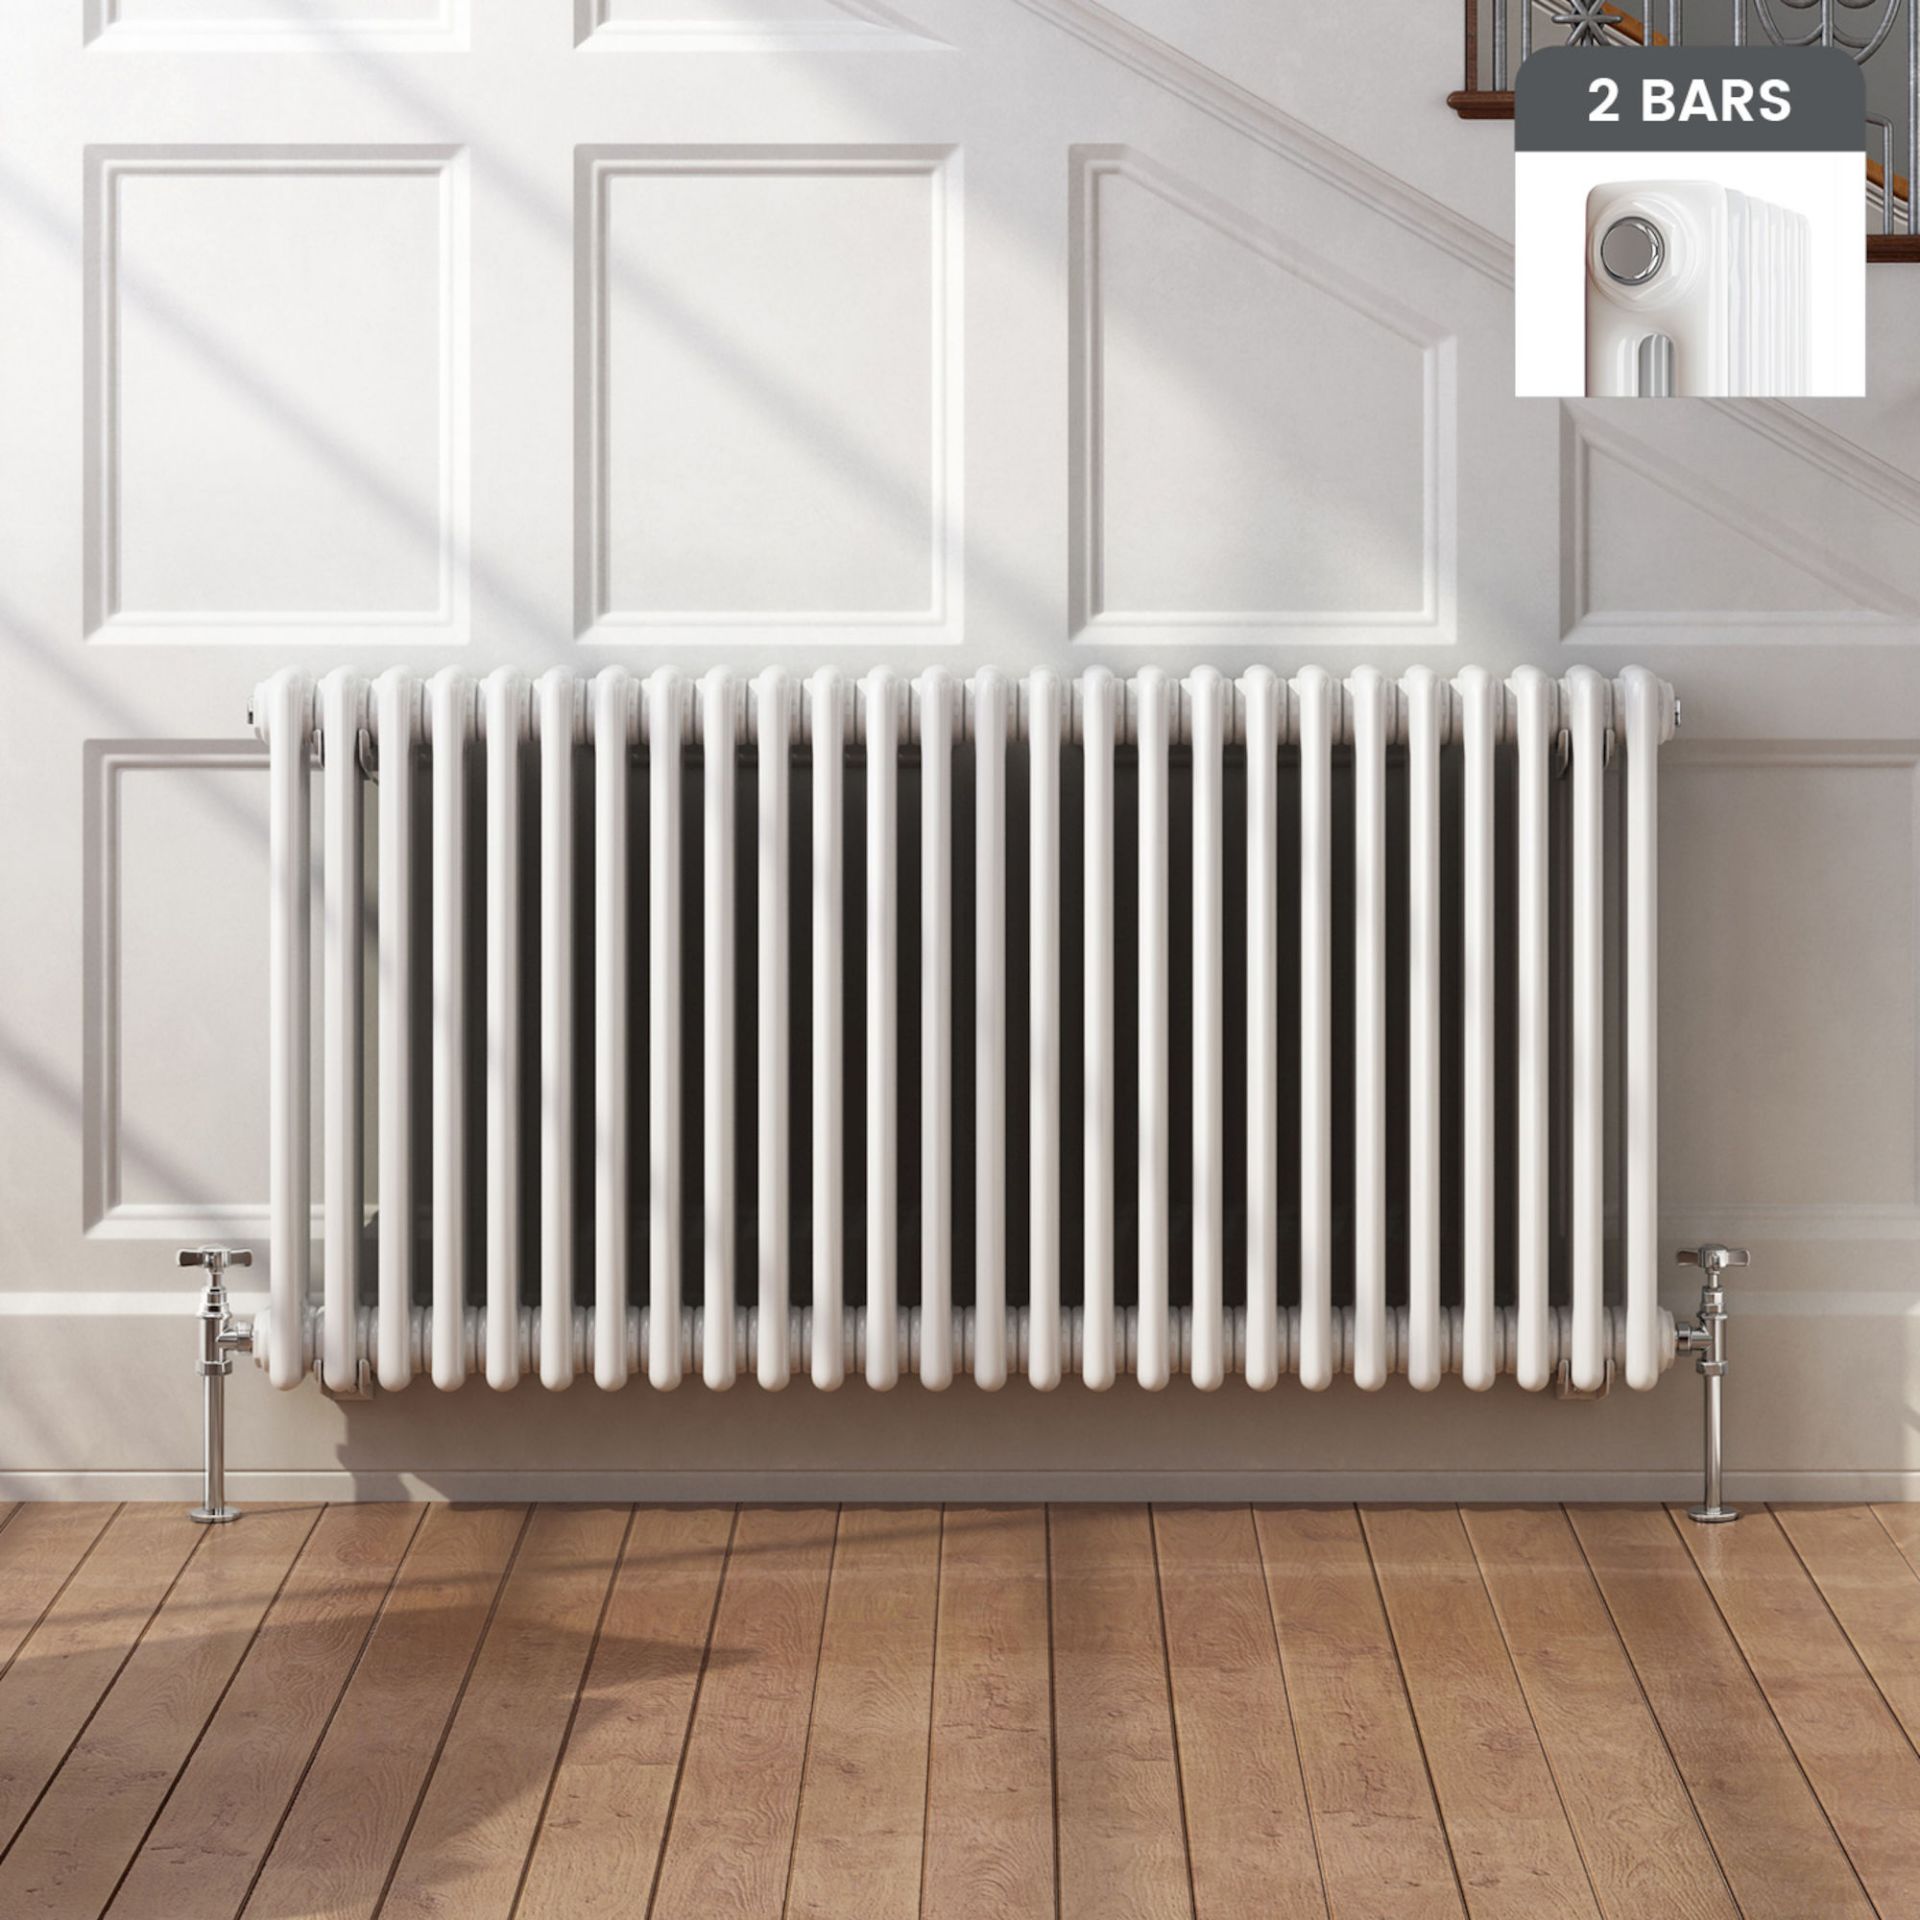 (DW87) 600x1188mm Traditional White Double Panel Horizontal Column Radiator. RRP £441.99. Made...